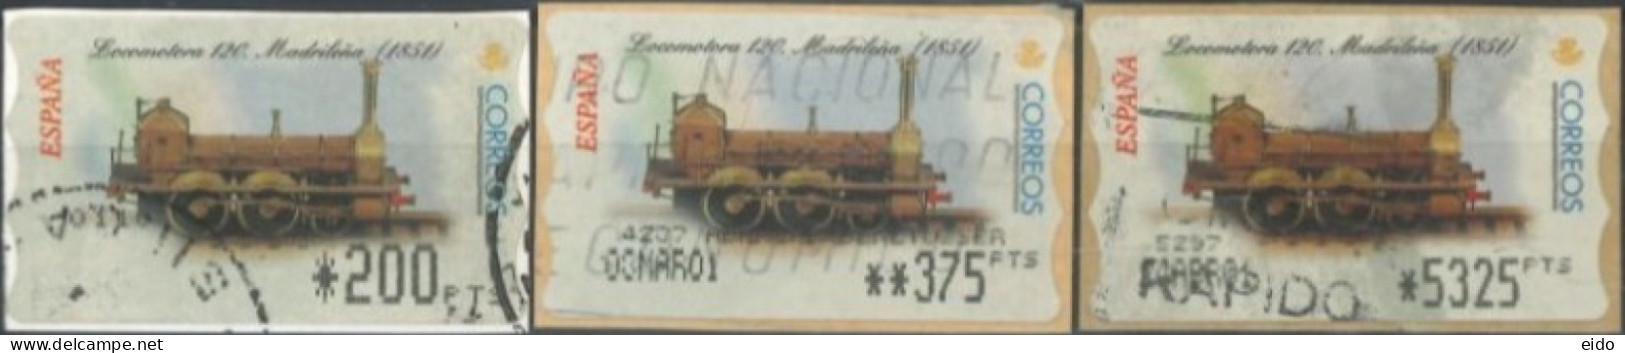 SPAIN- 2001, LOCOMOTIVES STAMPS LABELS SET OF 3, DIFFERENT VALUES, USED. - Usati